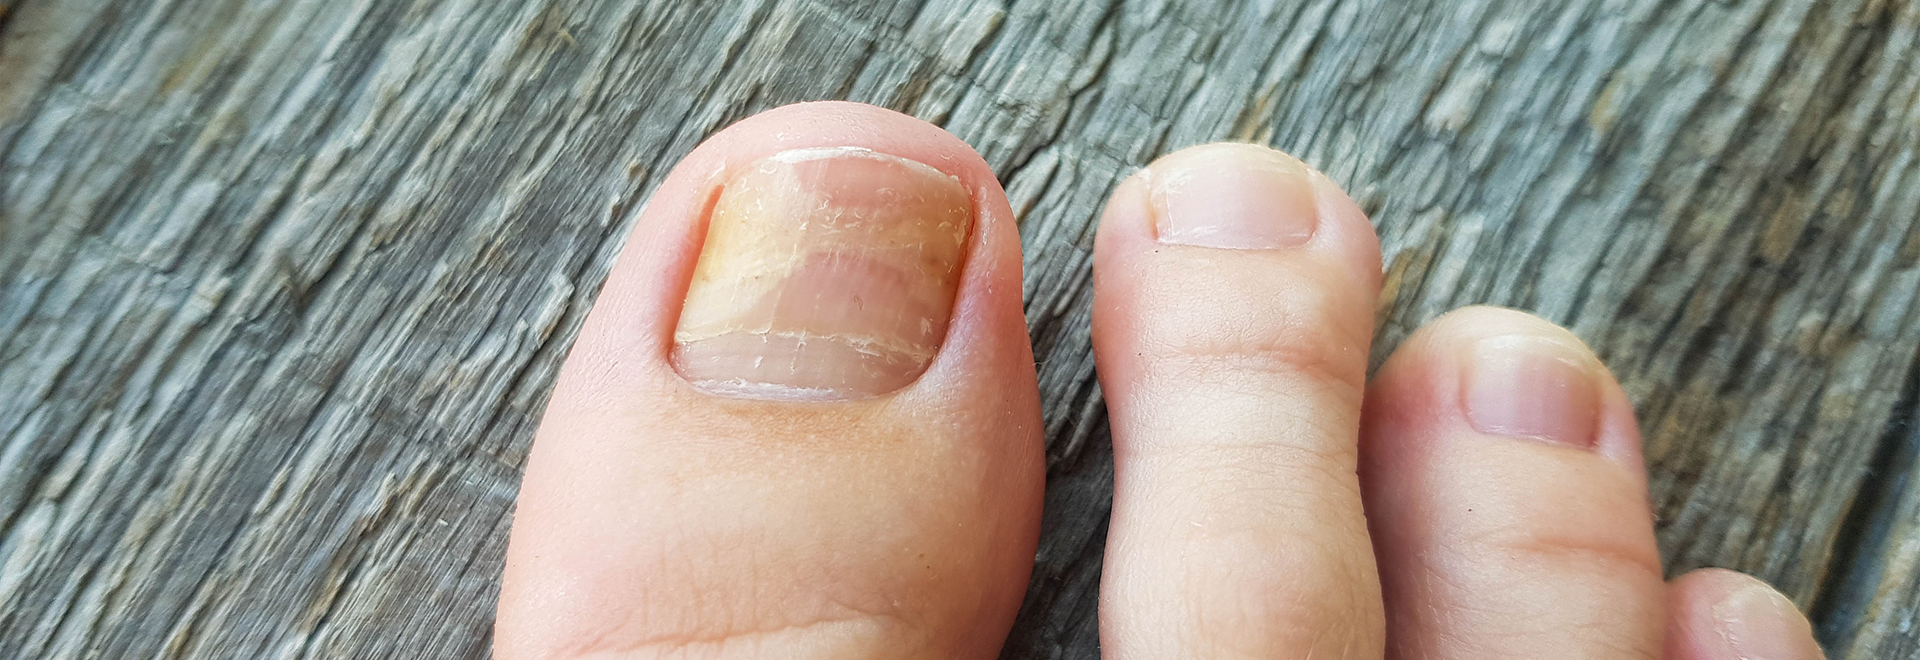 onychomycosis-fungal-nails-treatments-prevention-tips